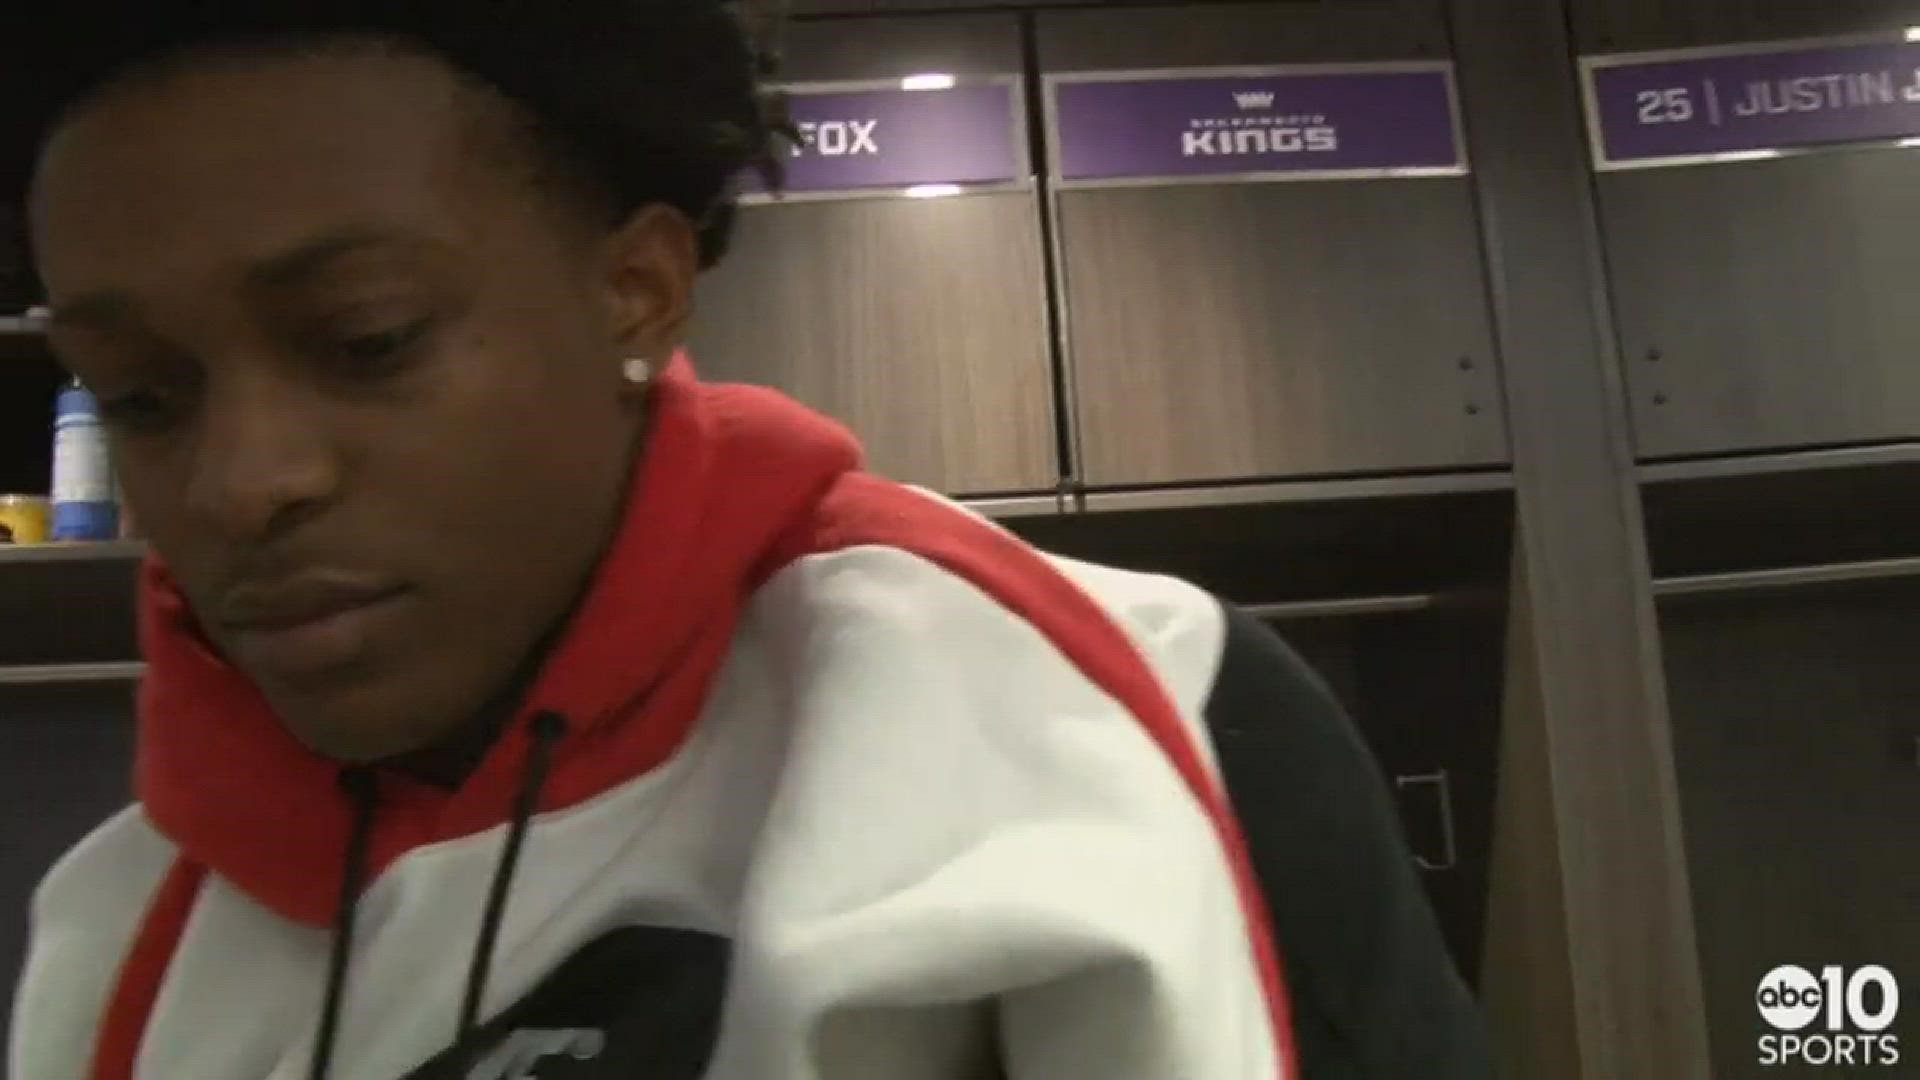 Kings rookie point guard De'Aaron Fox talks about his buzzer beating shot to force overtime, coming up big again against the Heat and Sacramento's overtime win over Miami on Wednesday.